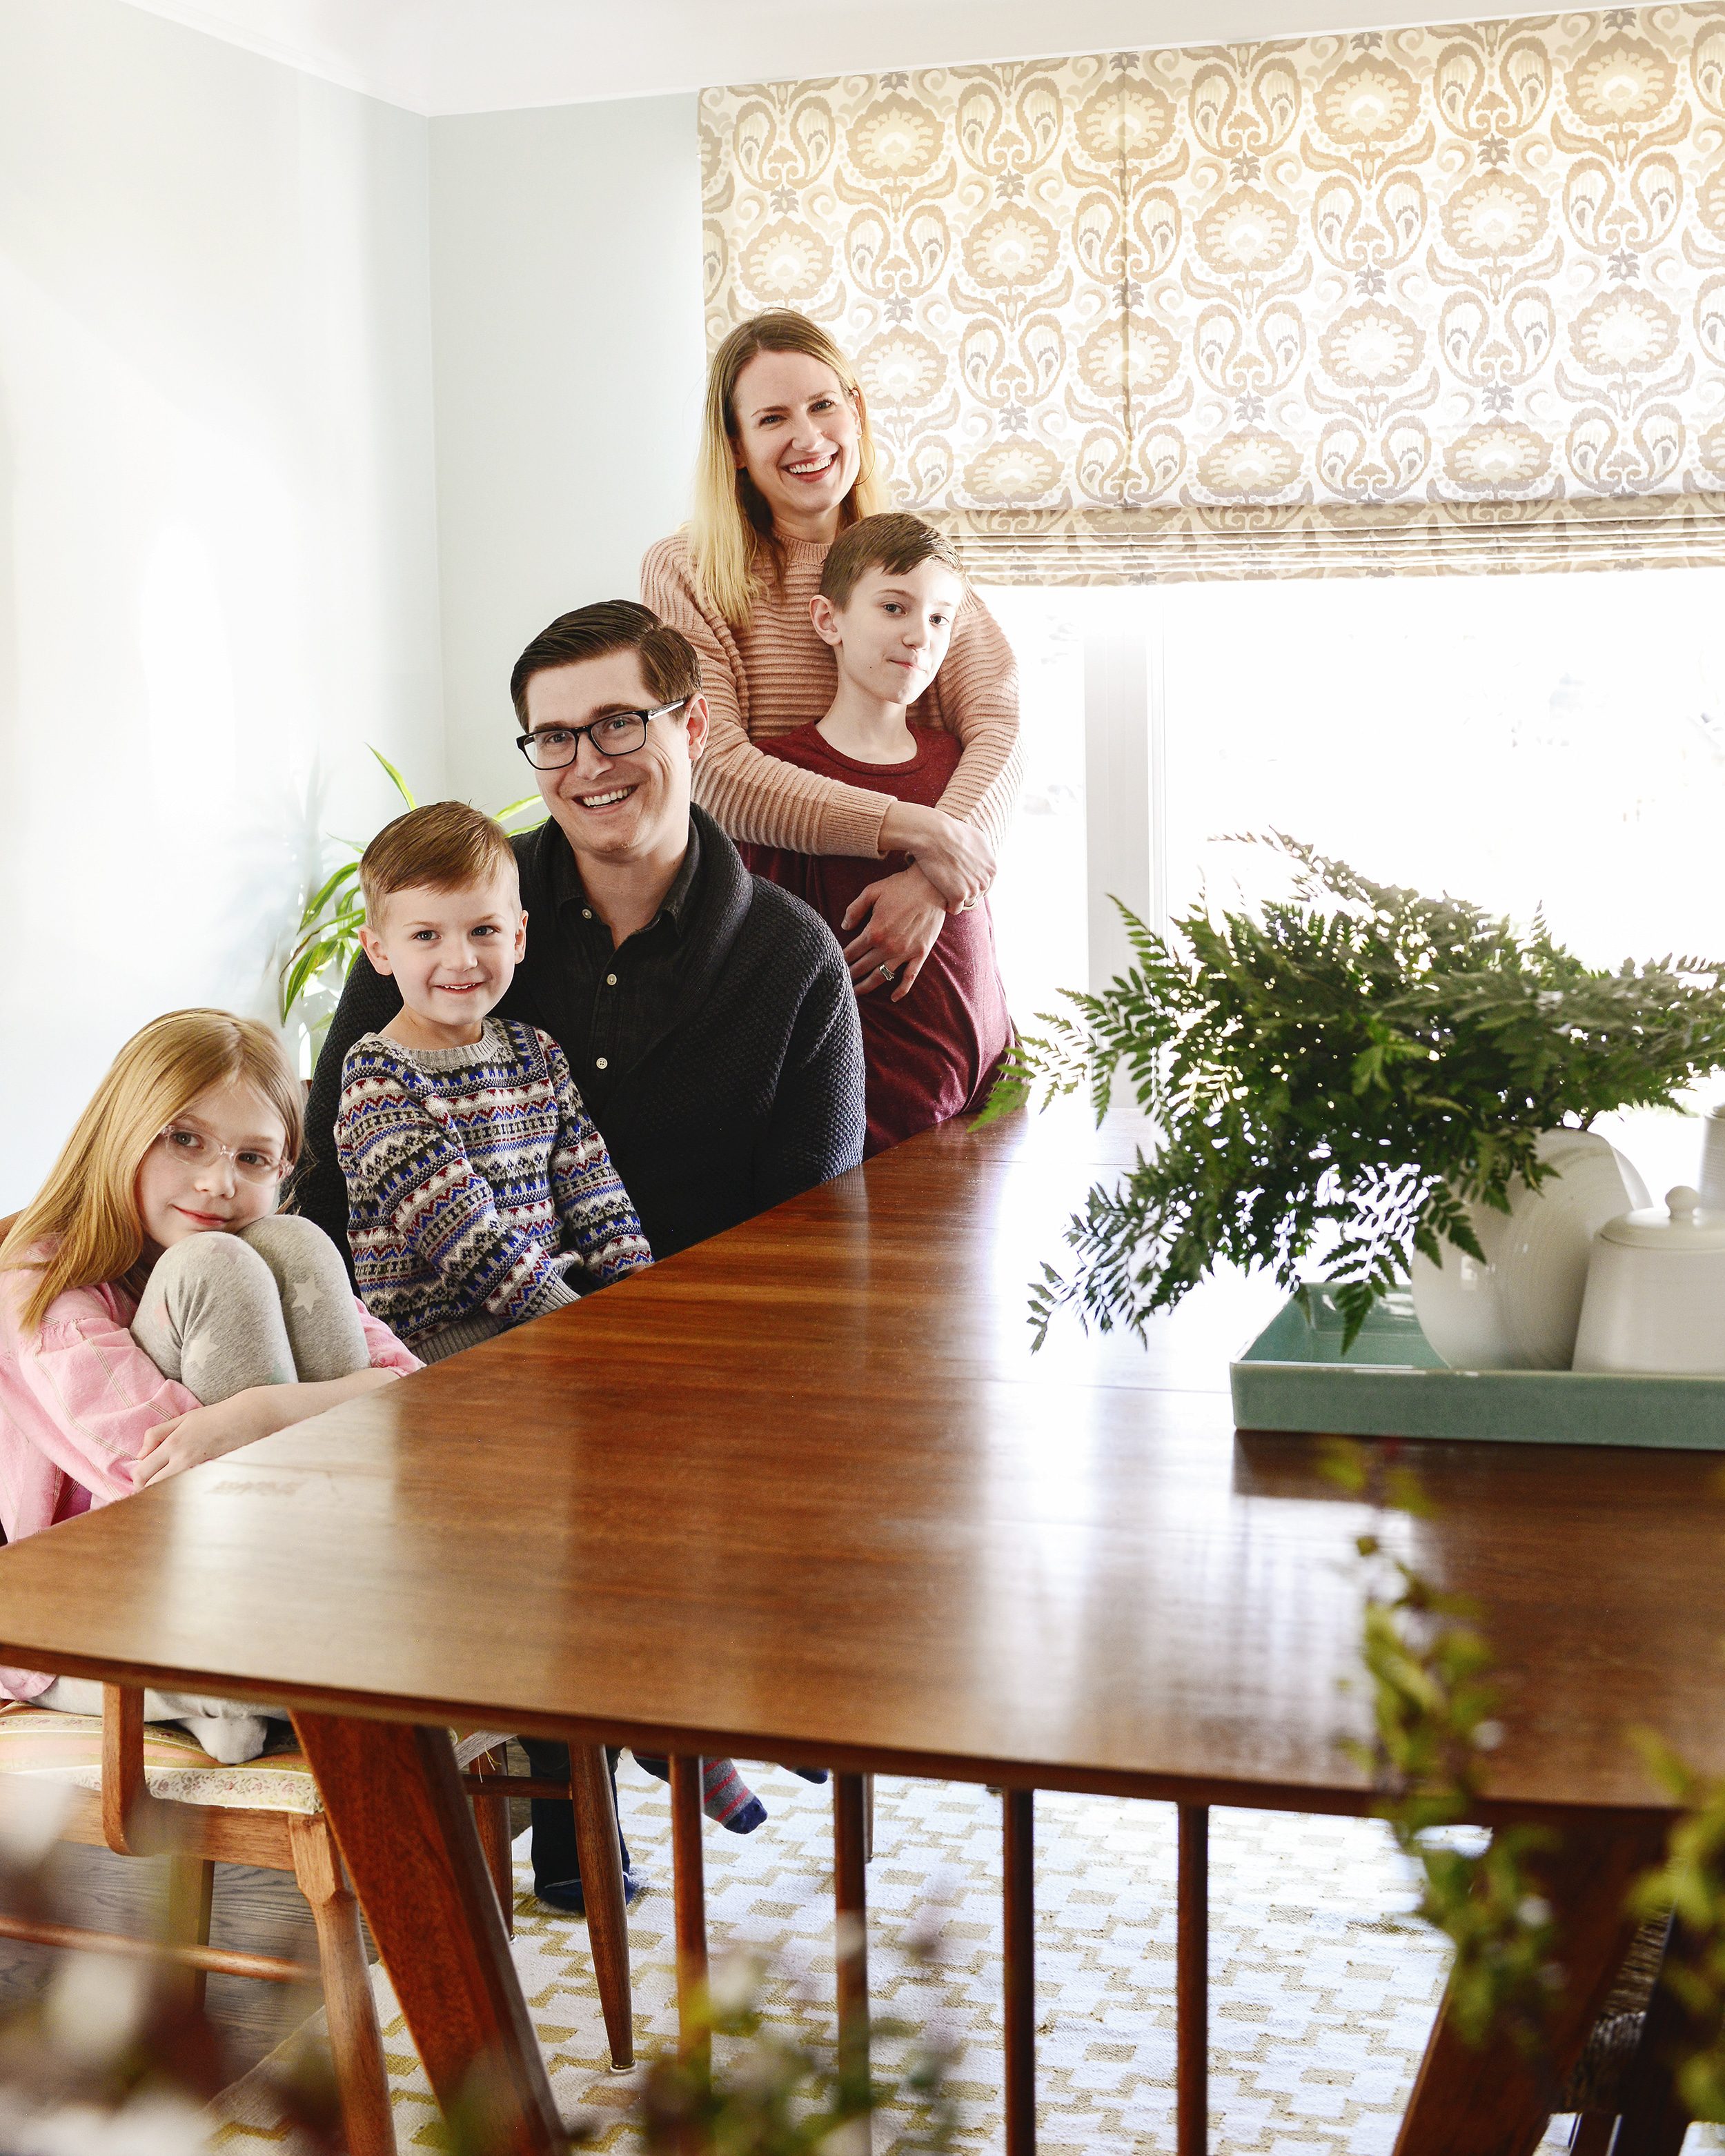 Family in a dining room with a Tailored Roman shade from Bali Blinds | via Yellow Brick Home